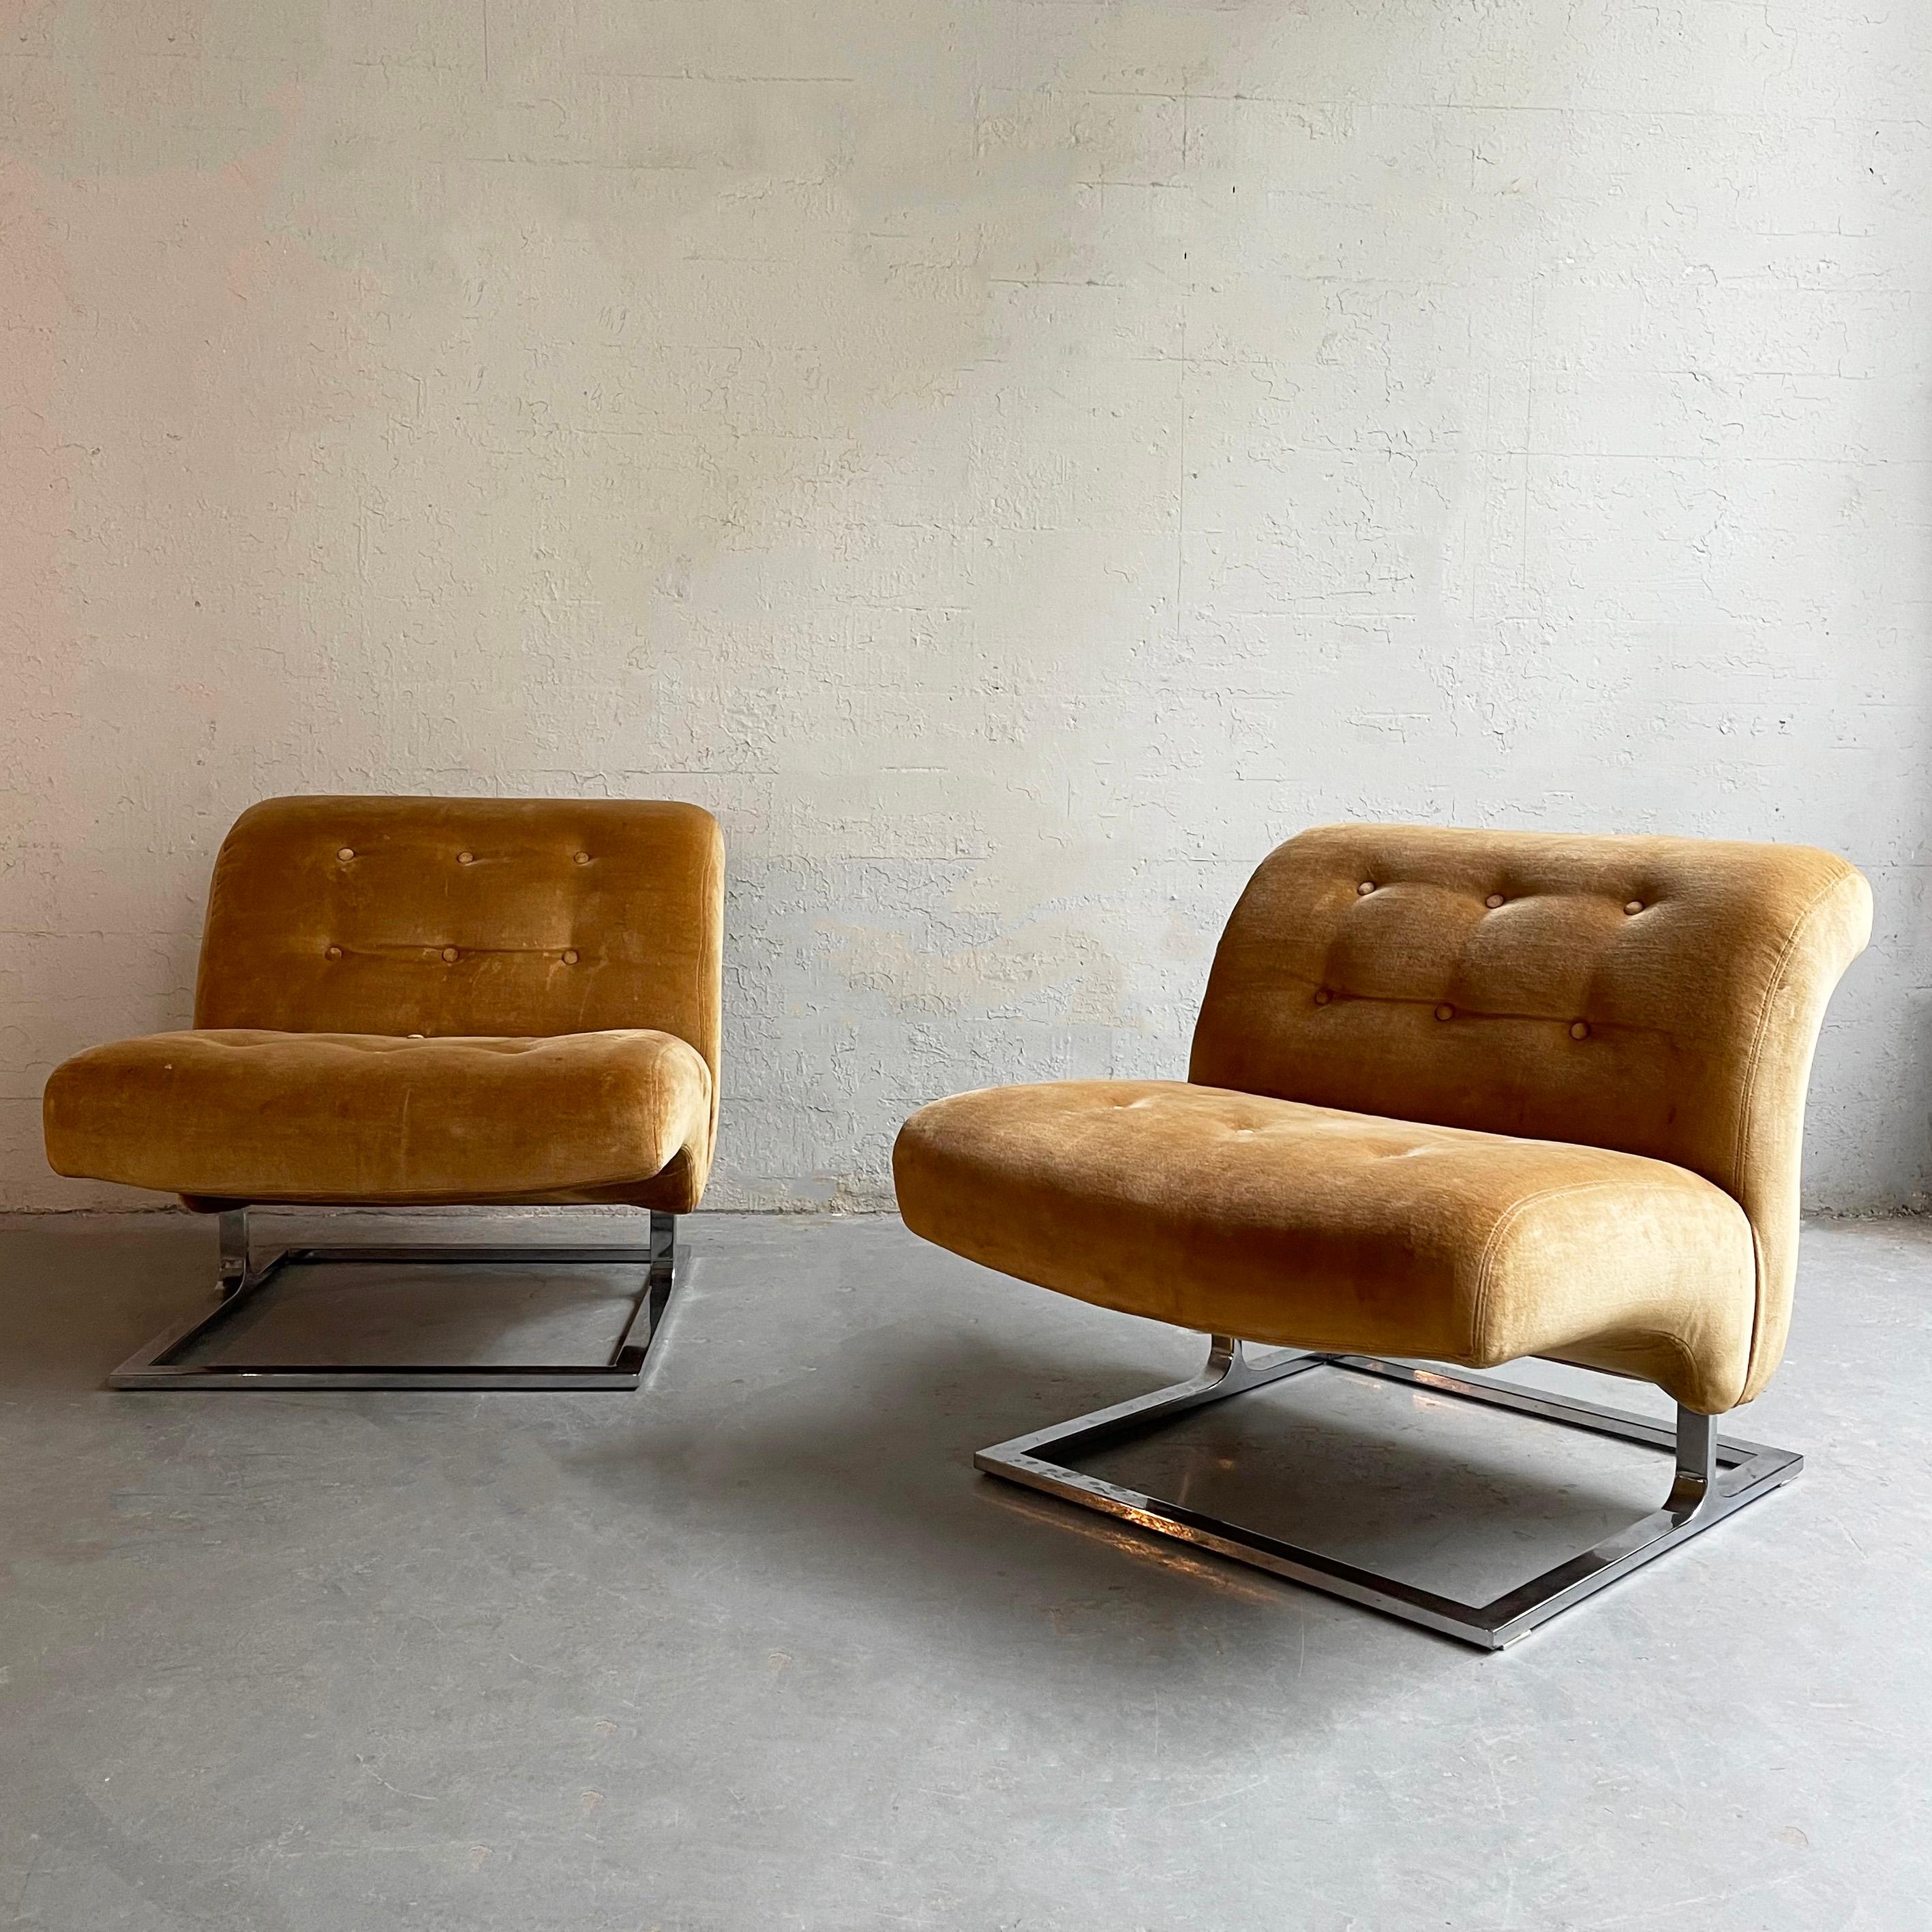 20th Century Pair Of Mid-Century Modern Chrome Cantilever Slipper Lounge Chairs For Sale